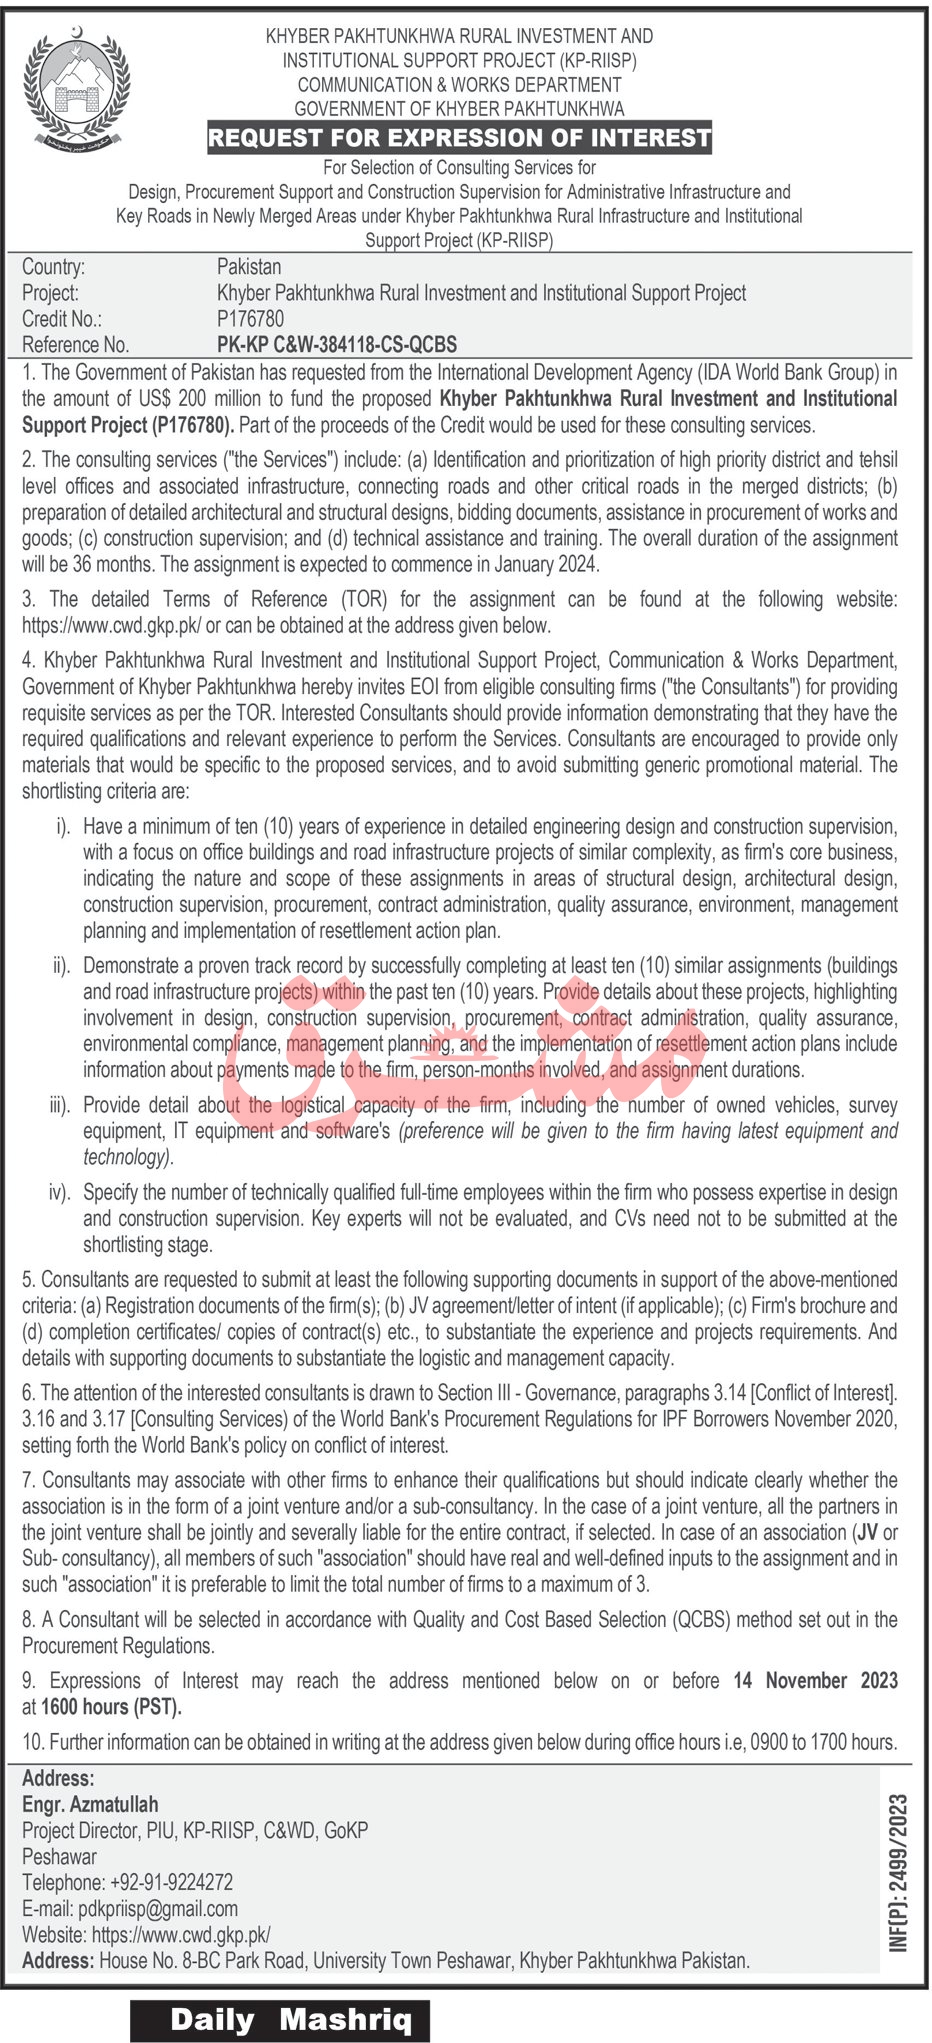 Jobs in Communication & Works Department